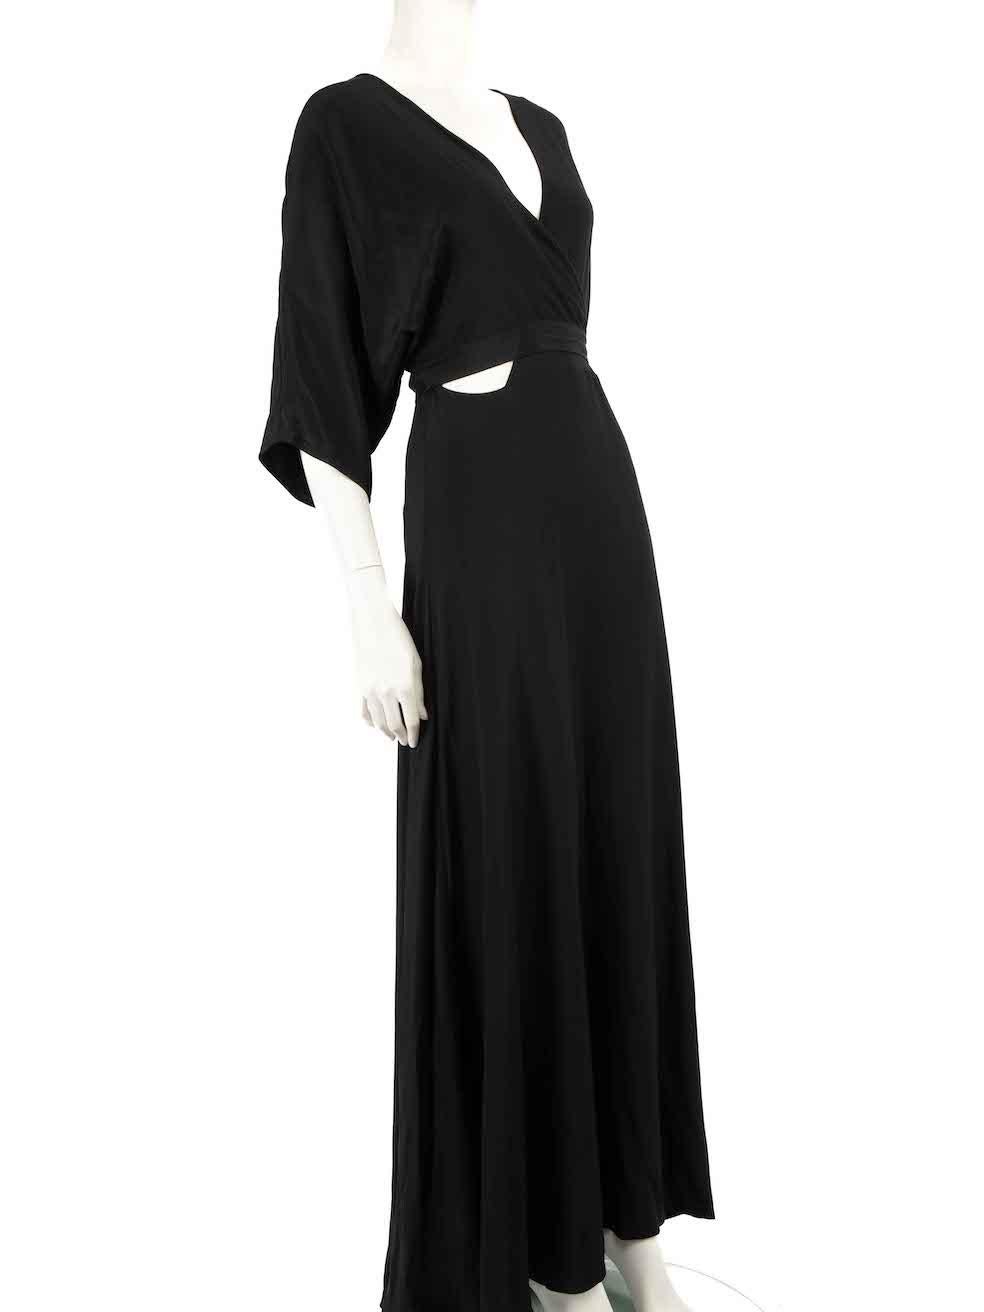 CONDITION is Very good. Hardly any visible wear to dress is evident. However, the size label is missing on this used Diane Von Furstenberg designer resale item.
 
 
 
 Details
 
 
 Black
 
 Silk
 
 Maxi dress
 
 Wrap bodice panel
 
 V neckline
 
